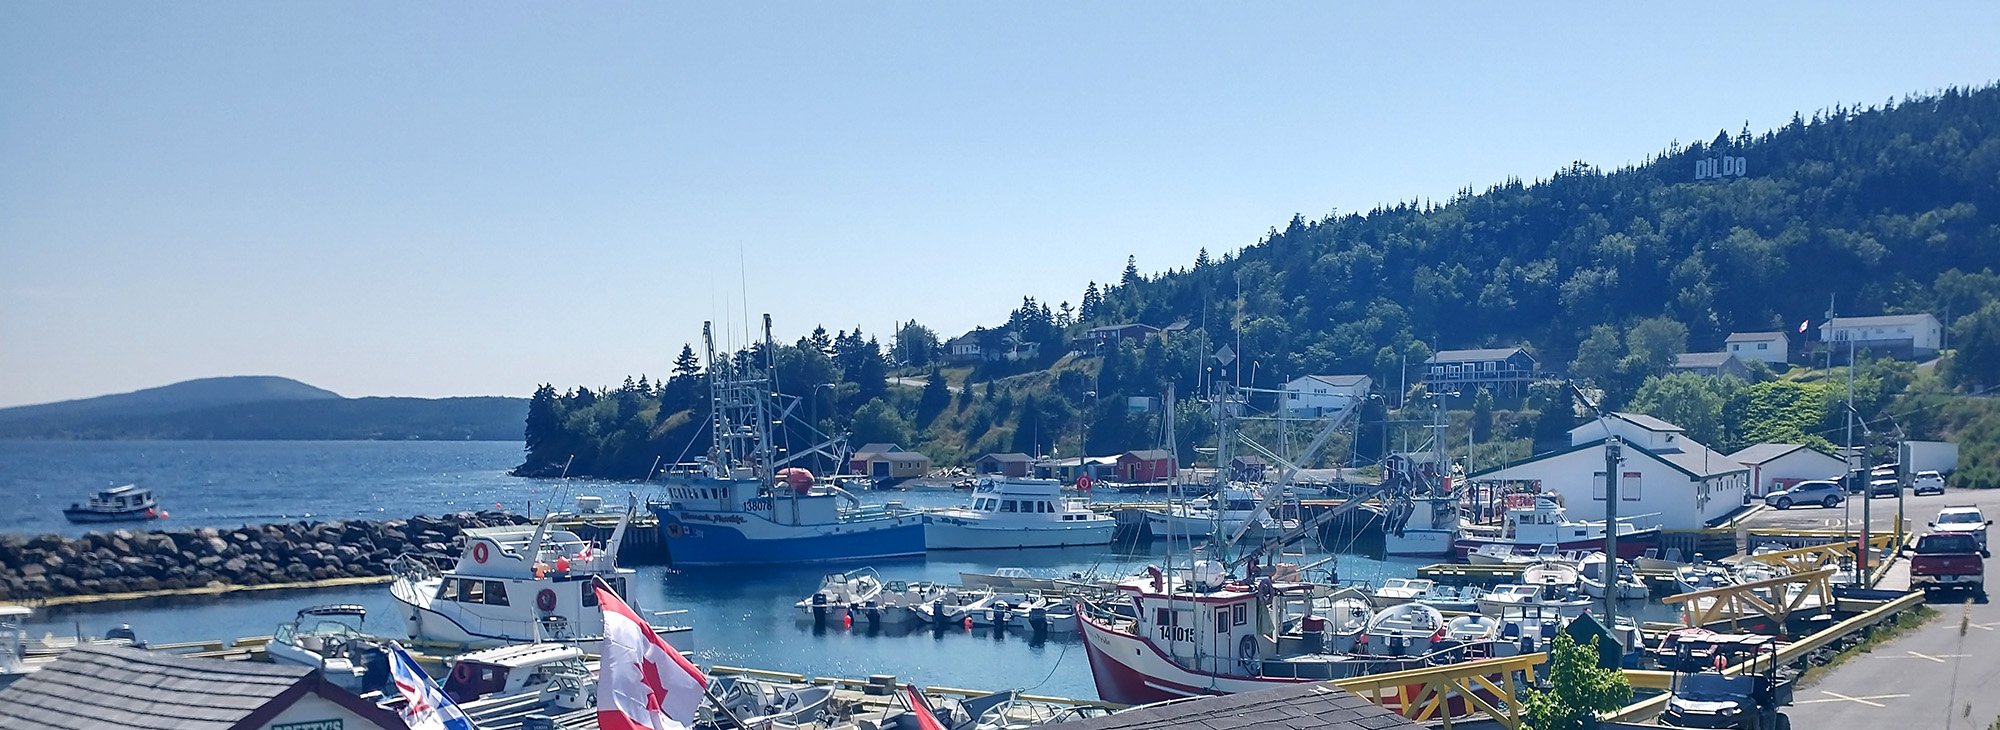 Town's marina. One of the people I stayed at says they use to process Sperm Whales in Dildo and you can dive and see a bunch of skeletons they left in the ocean. I didn't see any.